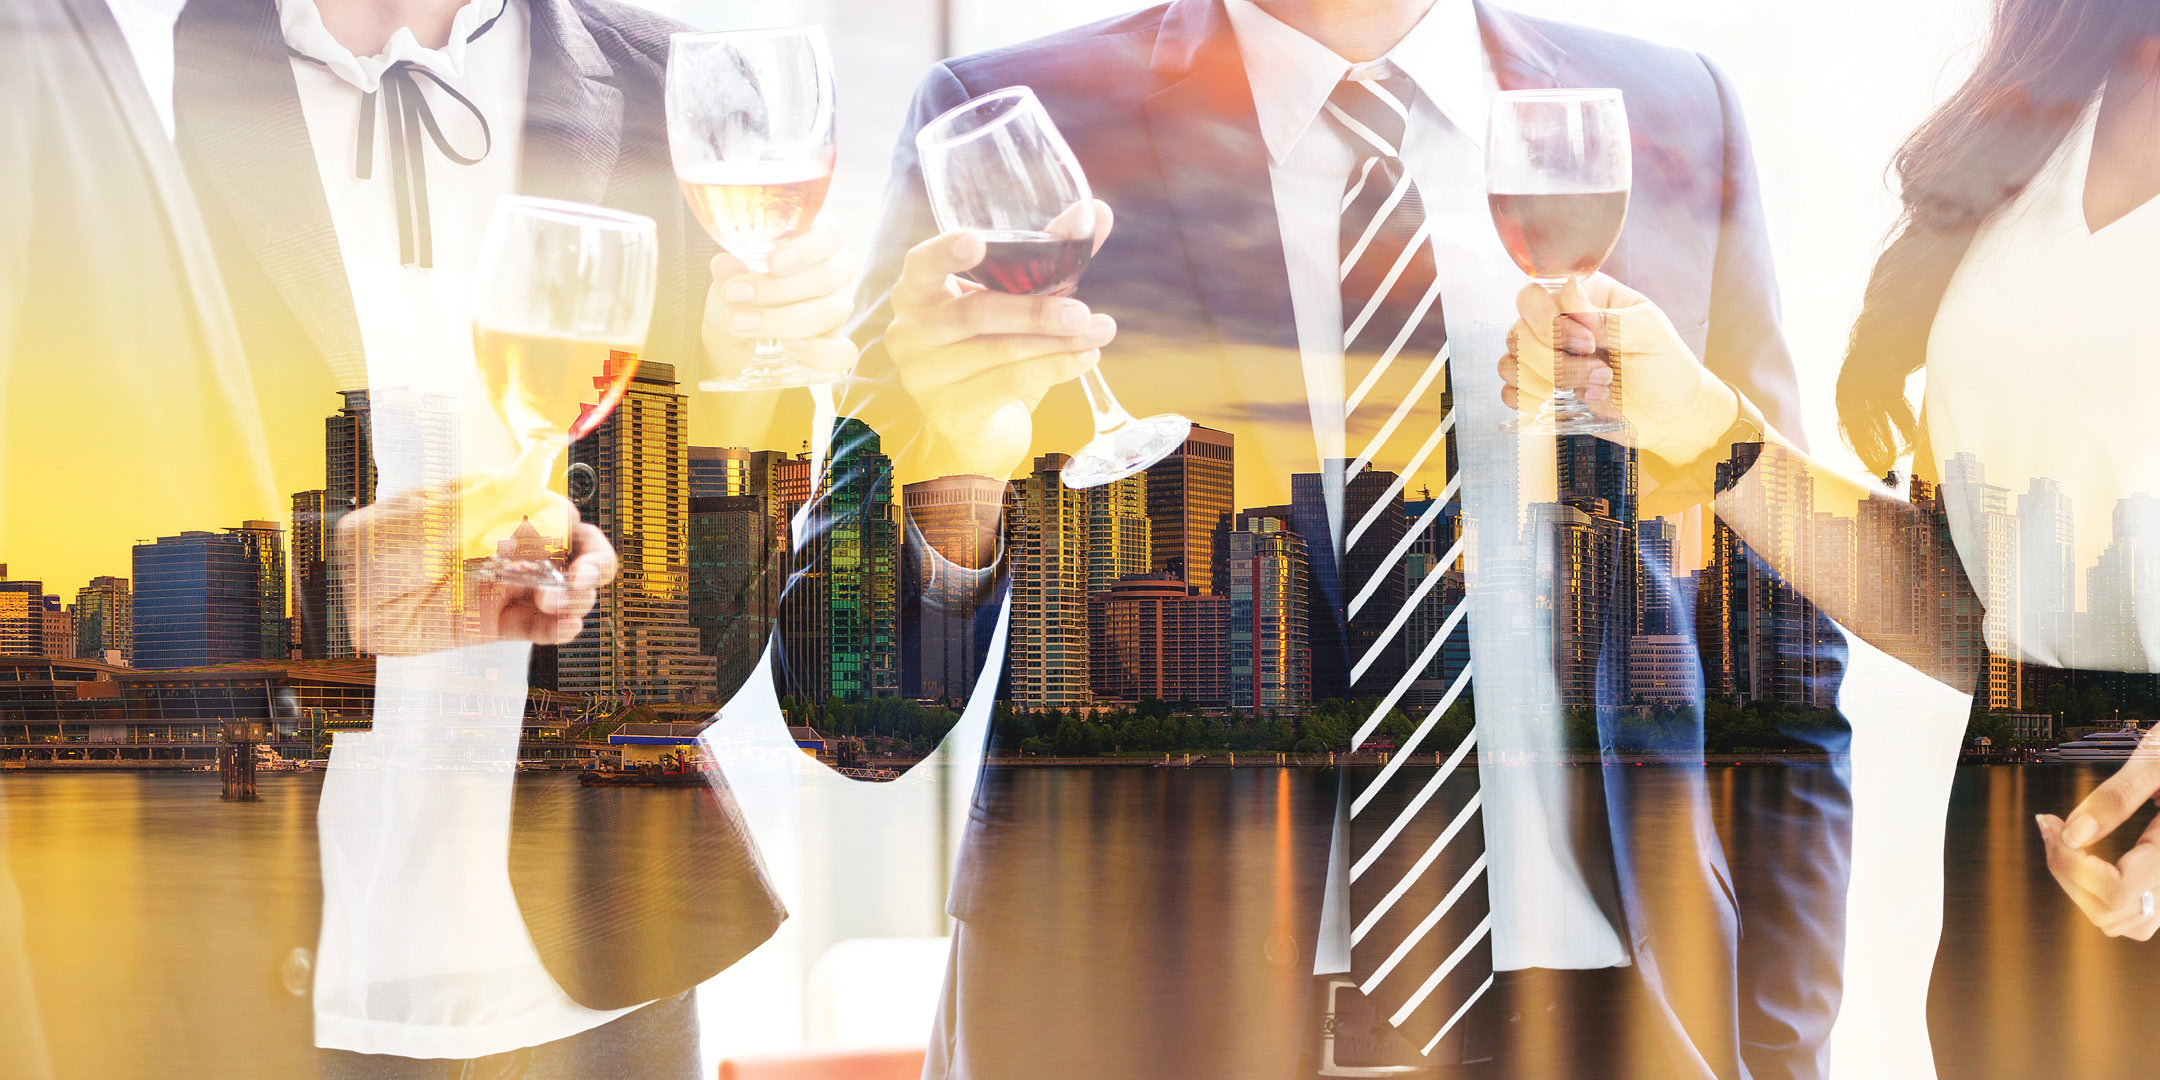 Business people celebrating with wine with a transparent photo of a city skyline in the background.